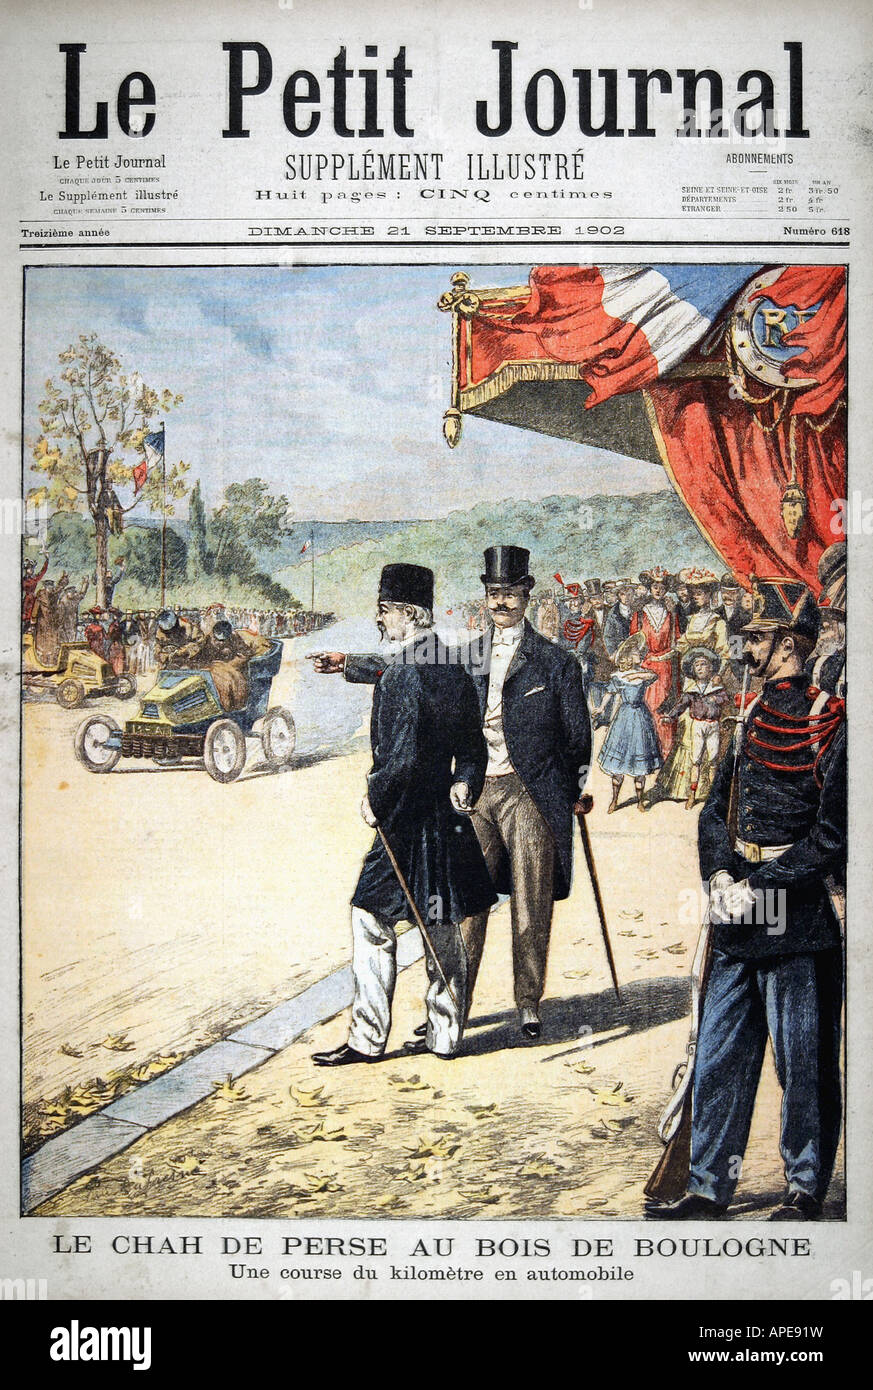 press/media, magazines, 'Le Petit Journal', Paris, 13 volume, number 618, illustrated supplement, Sunday 21 September 1902, title, 'The Shah of Persia at the Bois de Boulogne', , Stock Photo